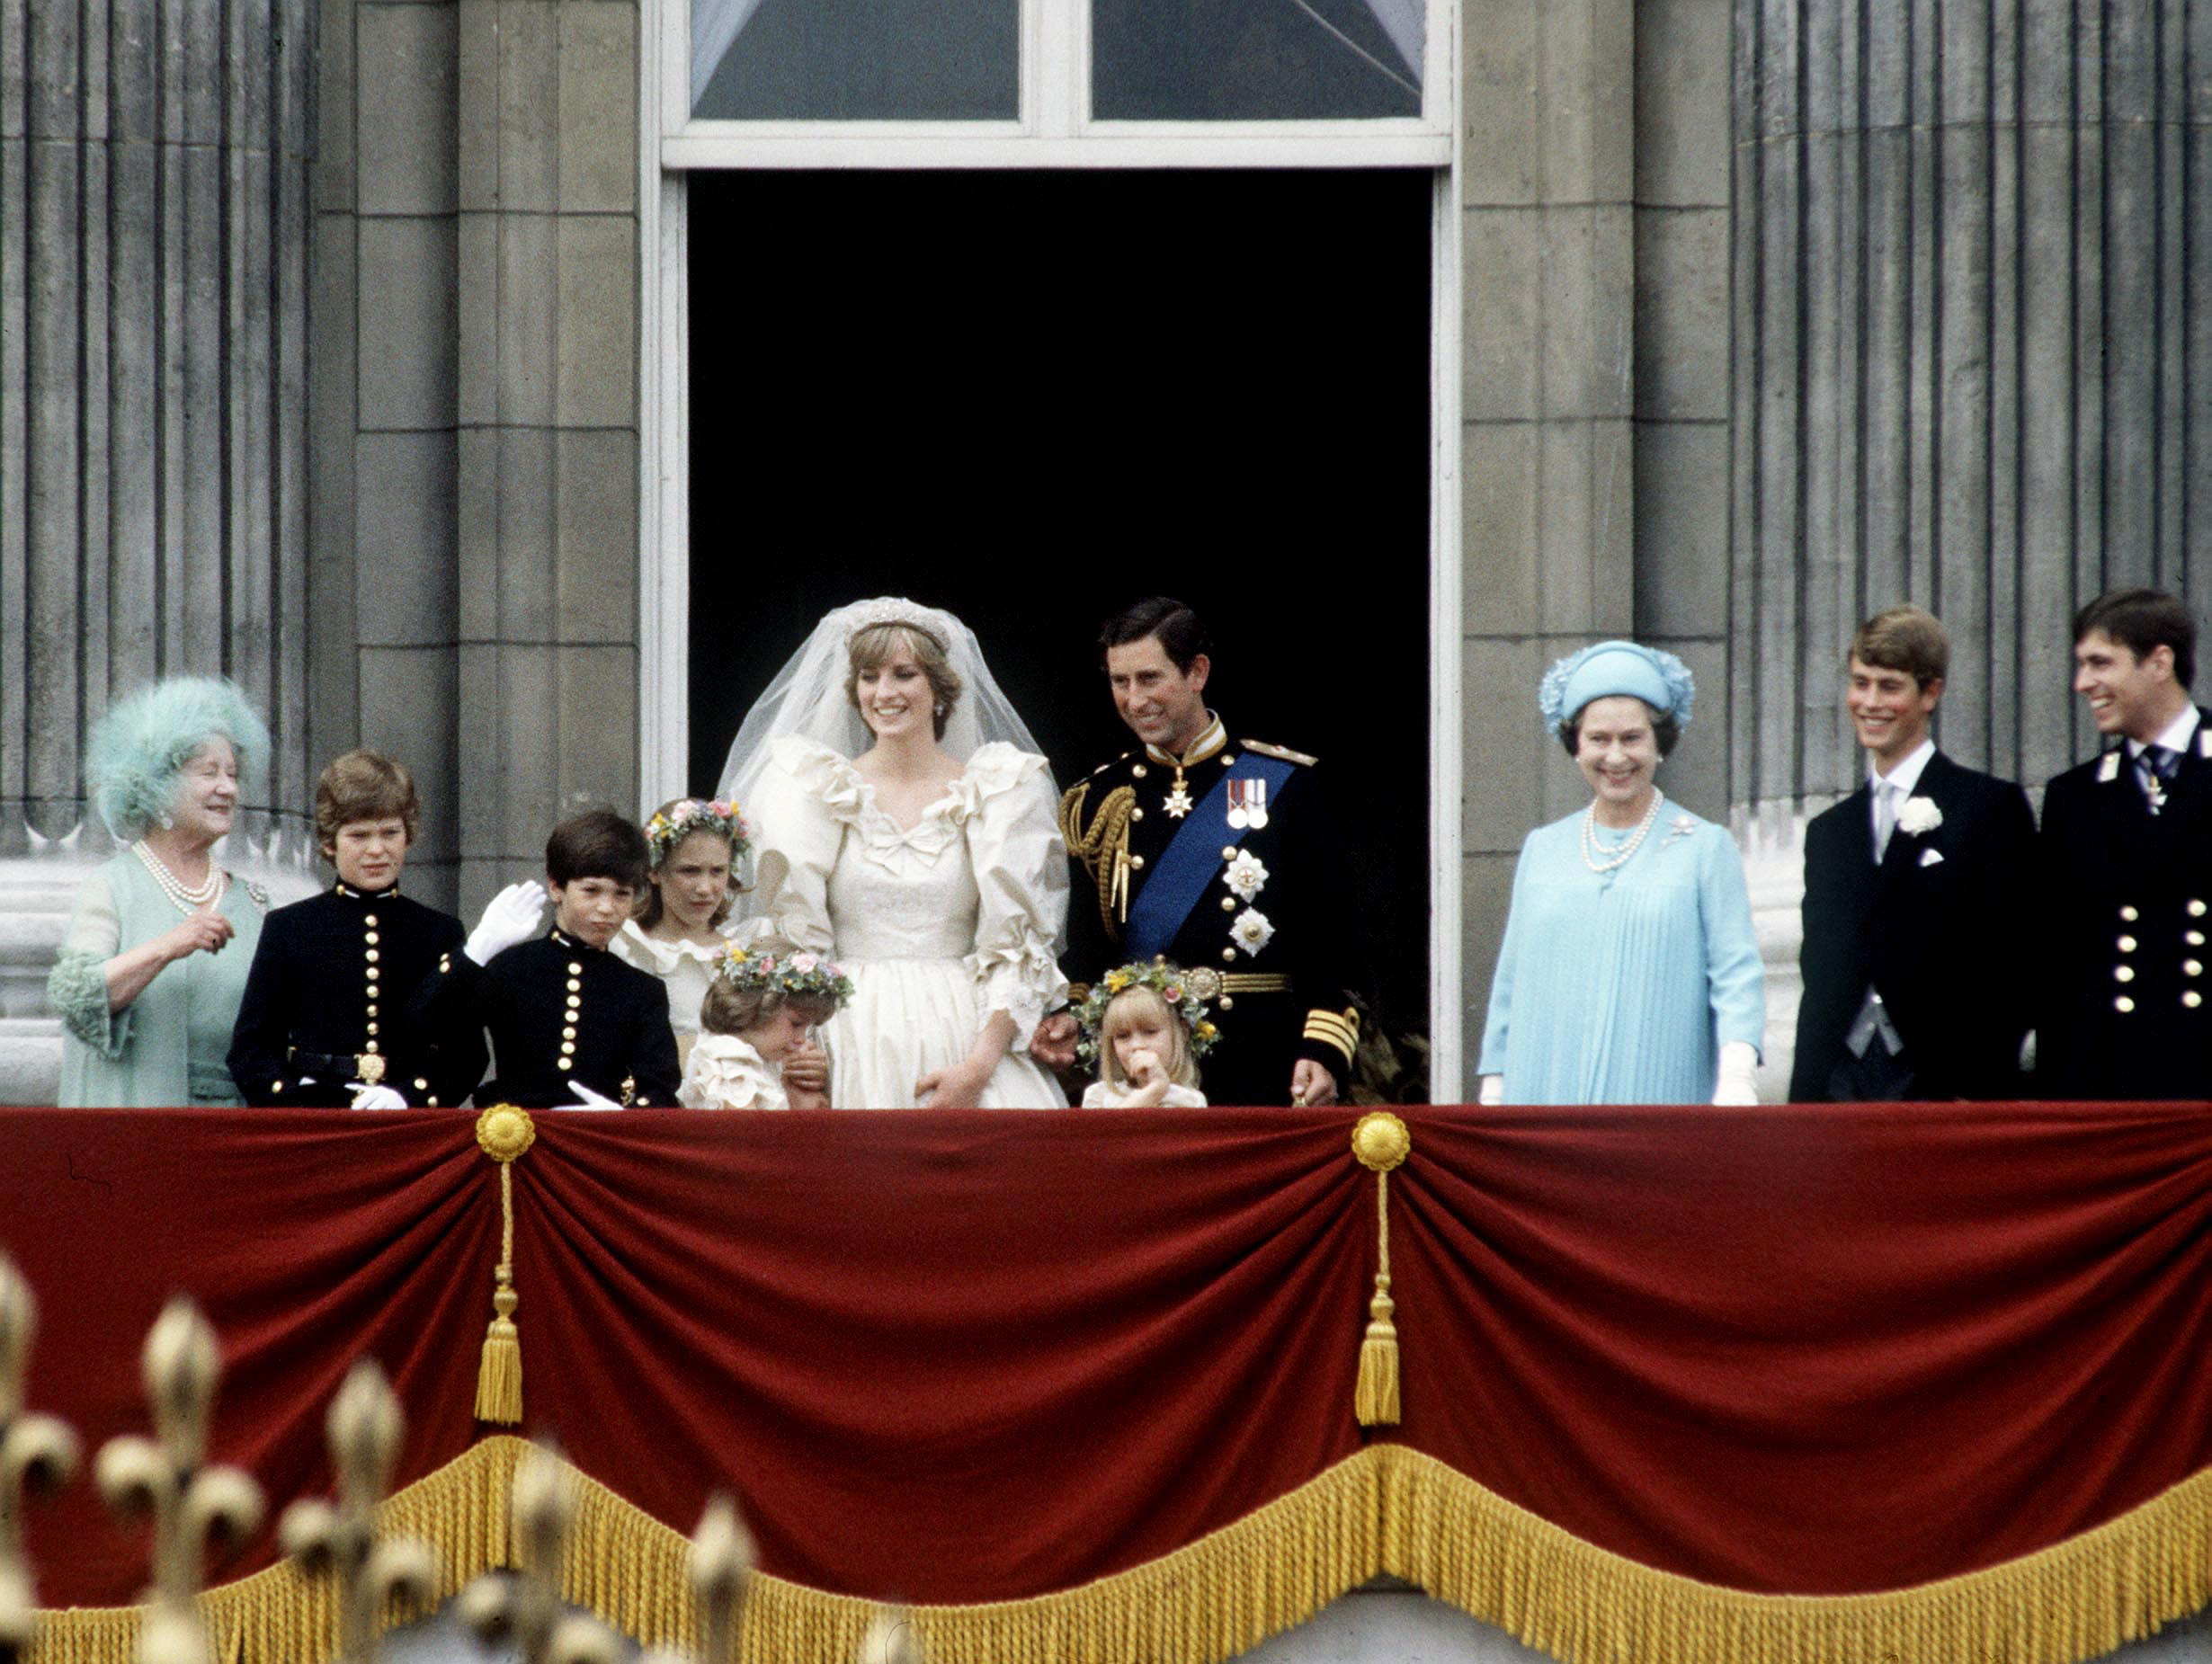 <p>Following their wedding on July 29, 1981, Prince Charles and Princess Diana posed on the balcony of Buckingham Palace in London with their bridesmaids and pageboys as well as family members including Queen Elizabeth II, Queen Elizabeth the Queen Mother, Prince Edward and Prince Andrew.</p>